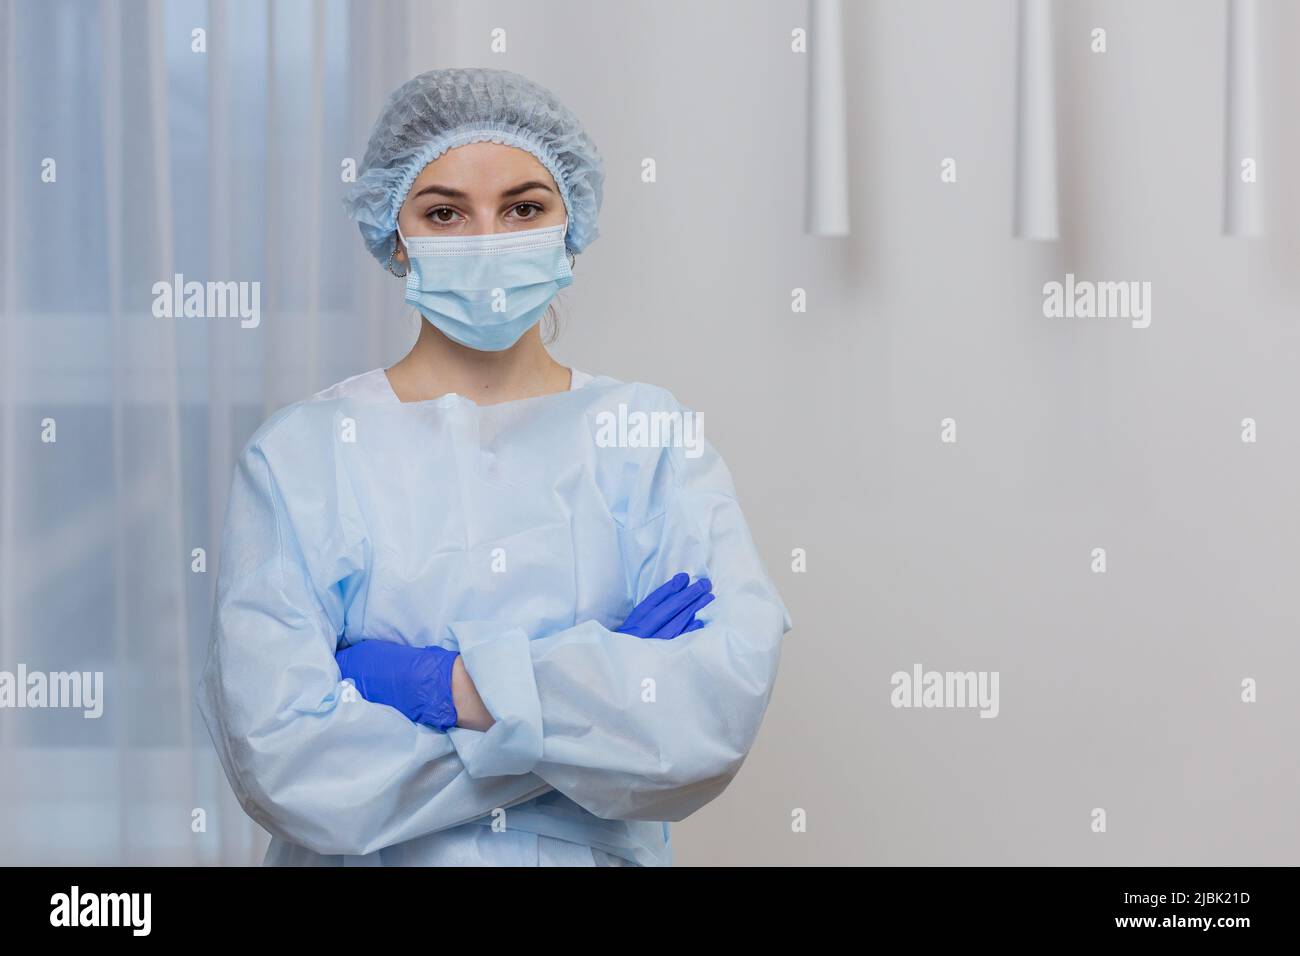 Portrait of a young female doctor in a mask, surgical gown and hat, standing with arms crossed, looking at camera Stock Photo